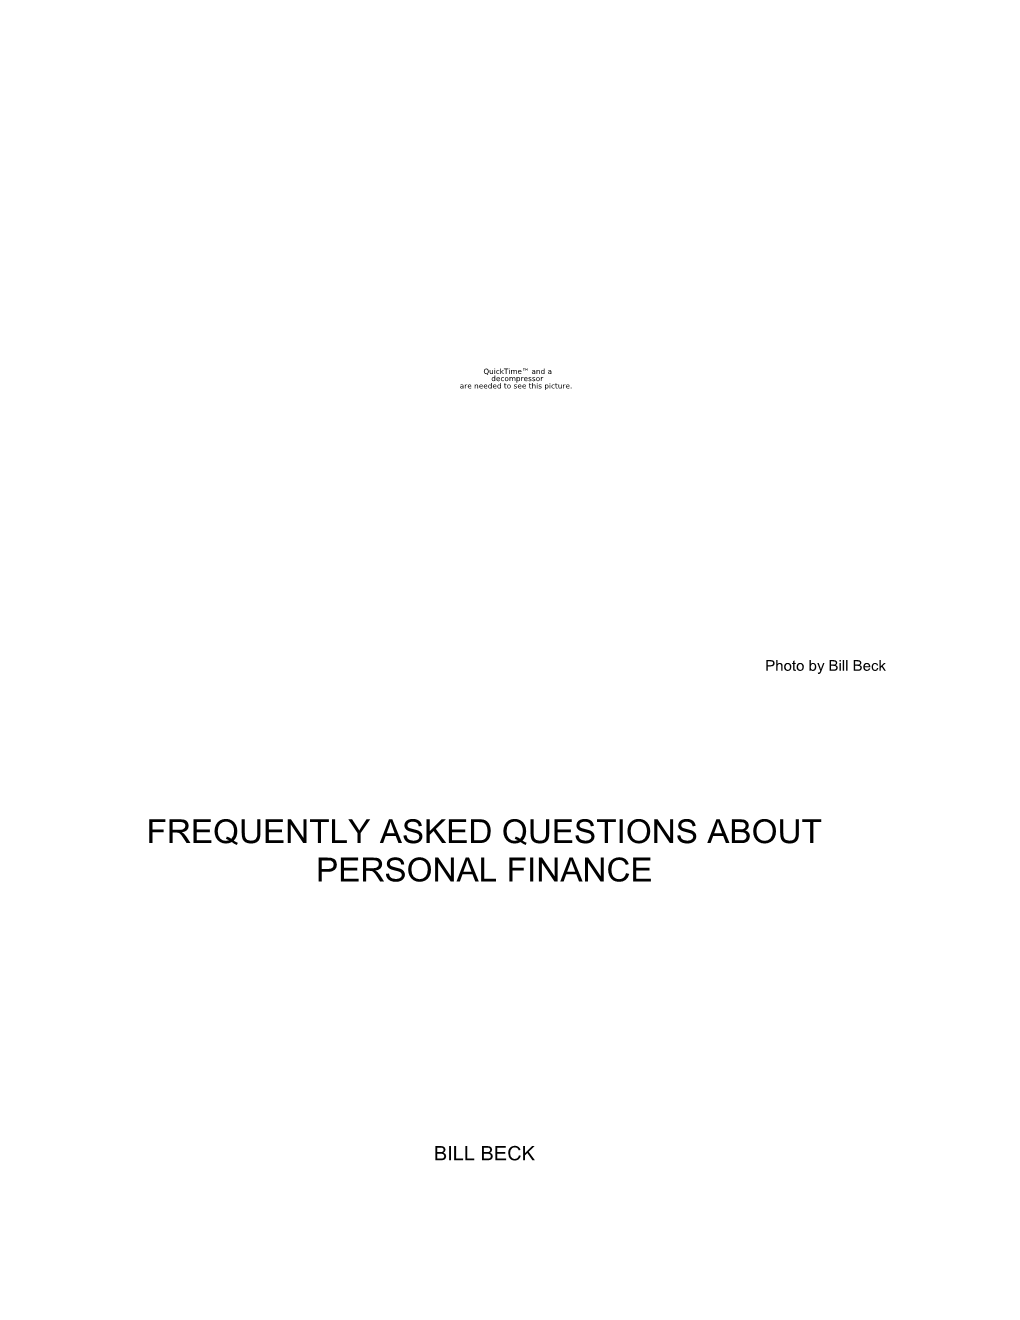 Frequently Asked Questions About Personal Finance